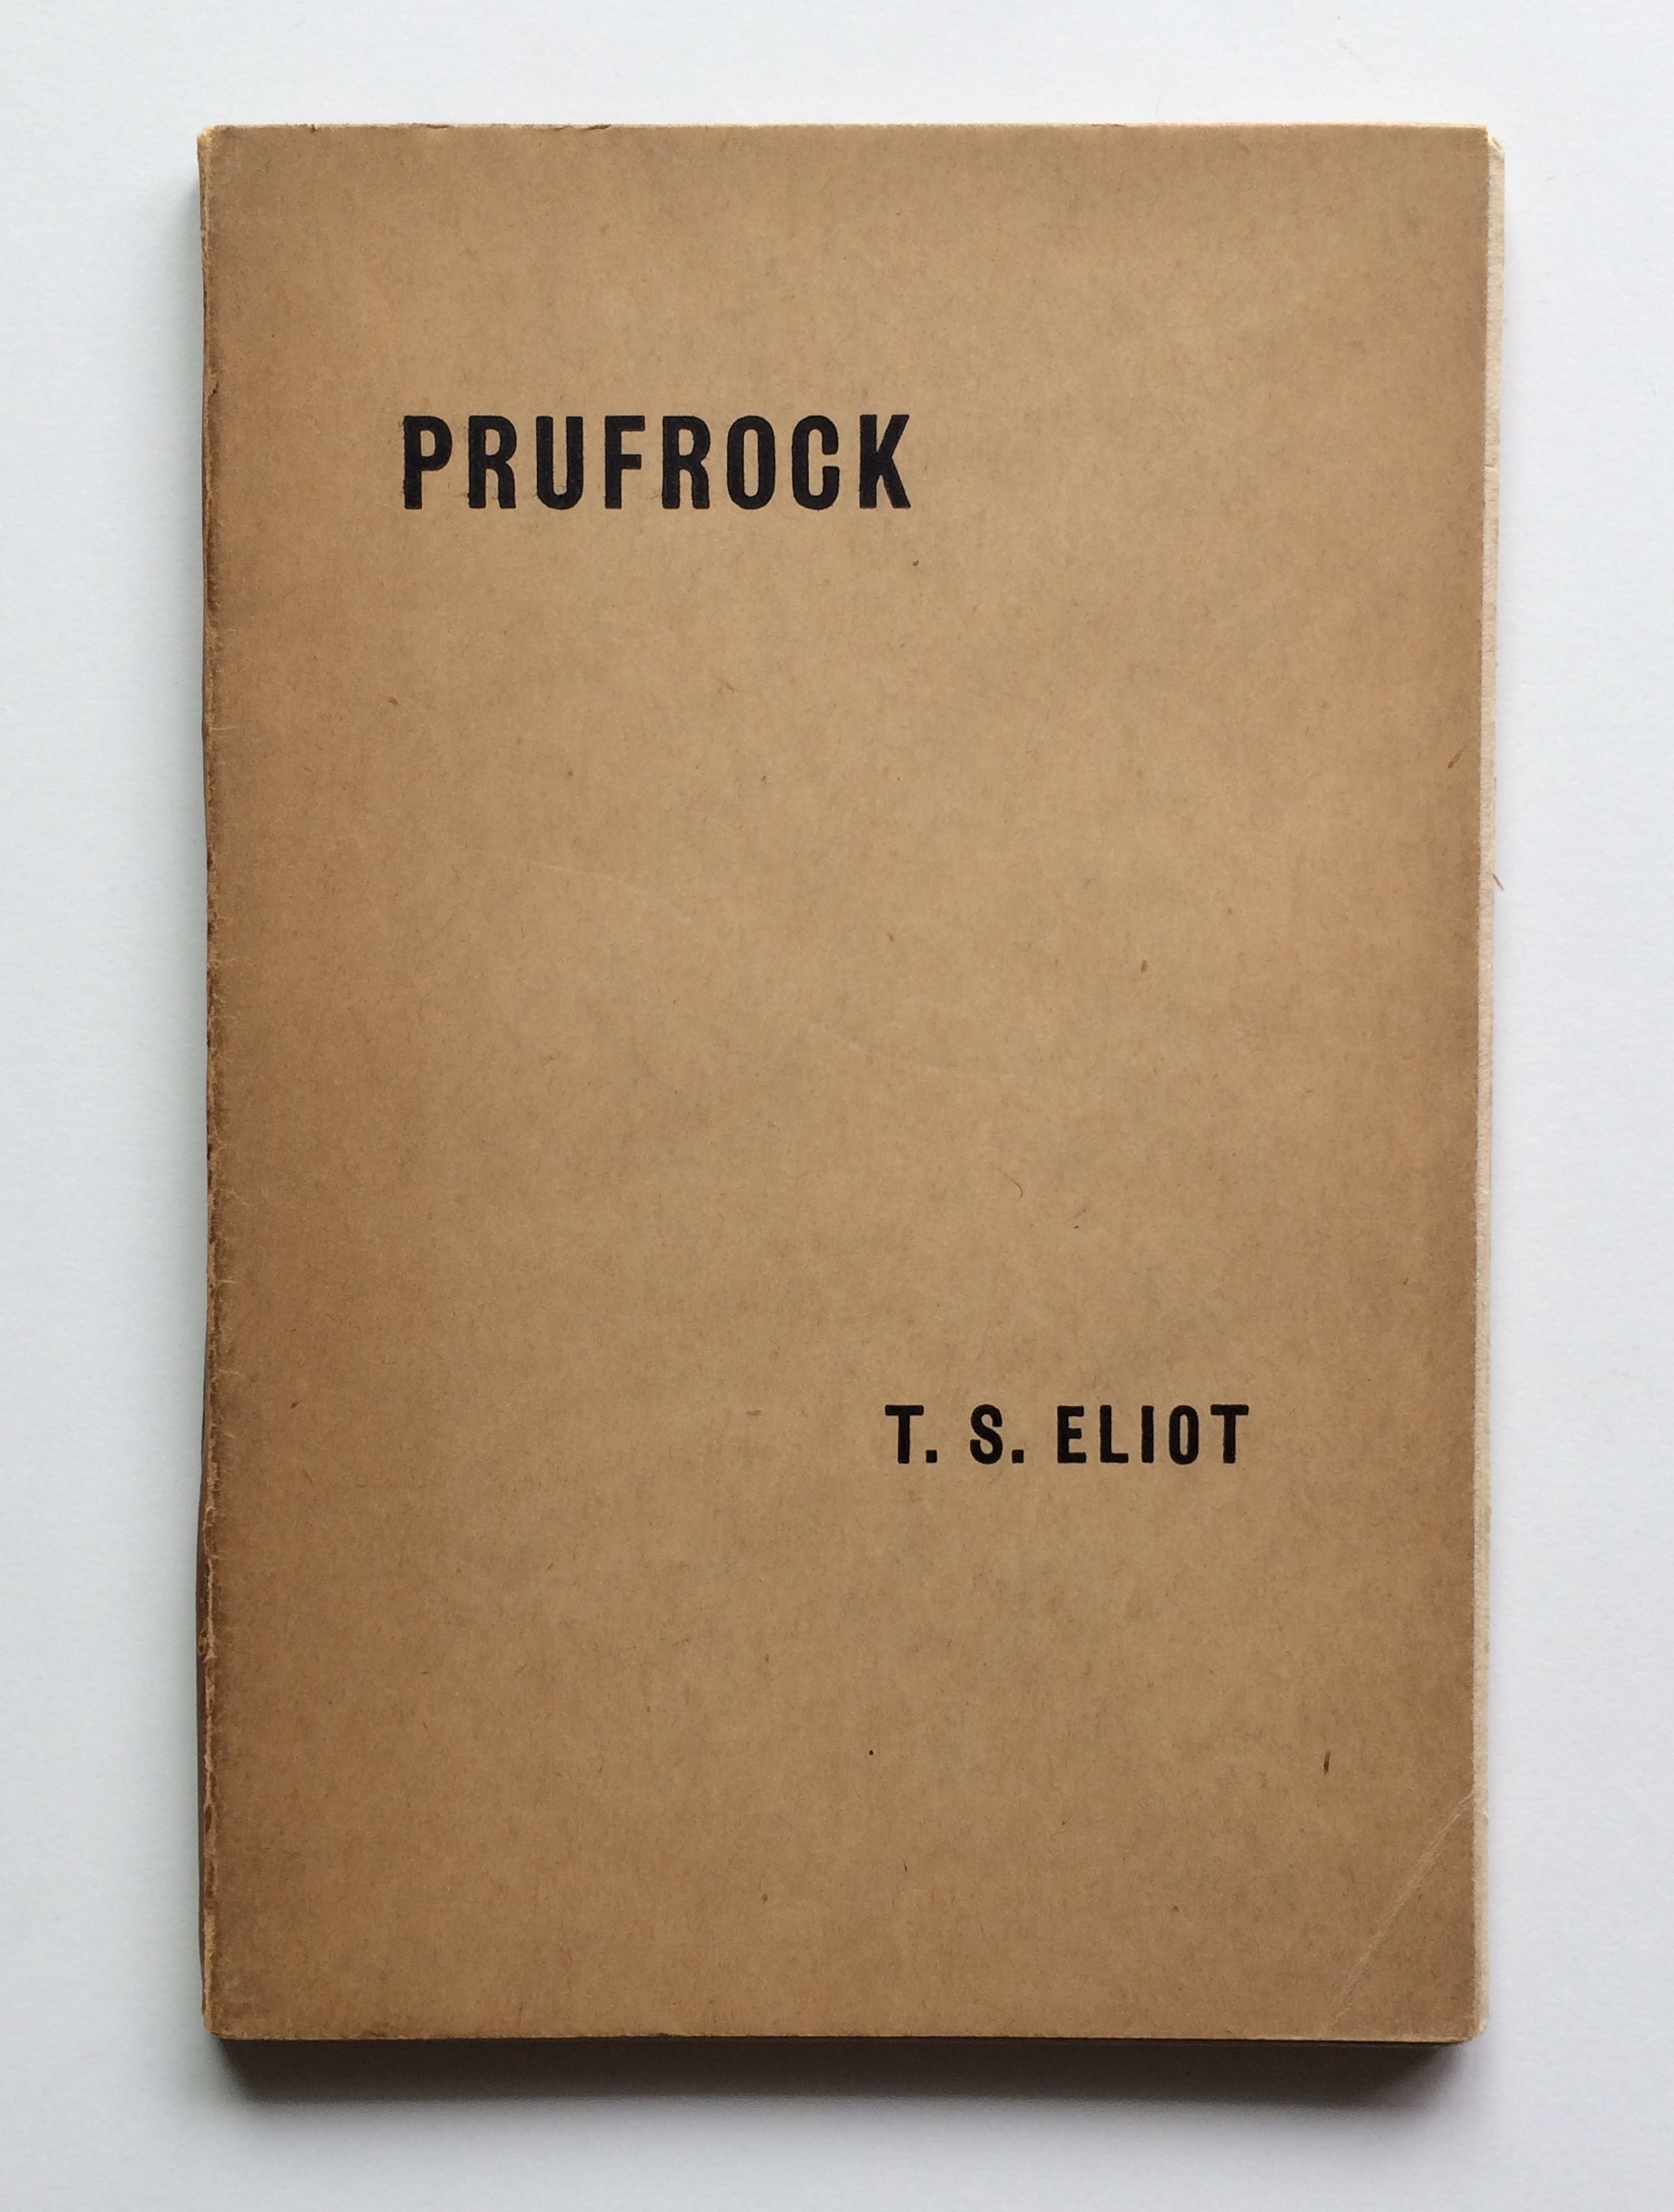 Eliot, T.S. - Prufrock - 1 - Front Wrapper